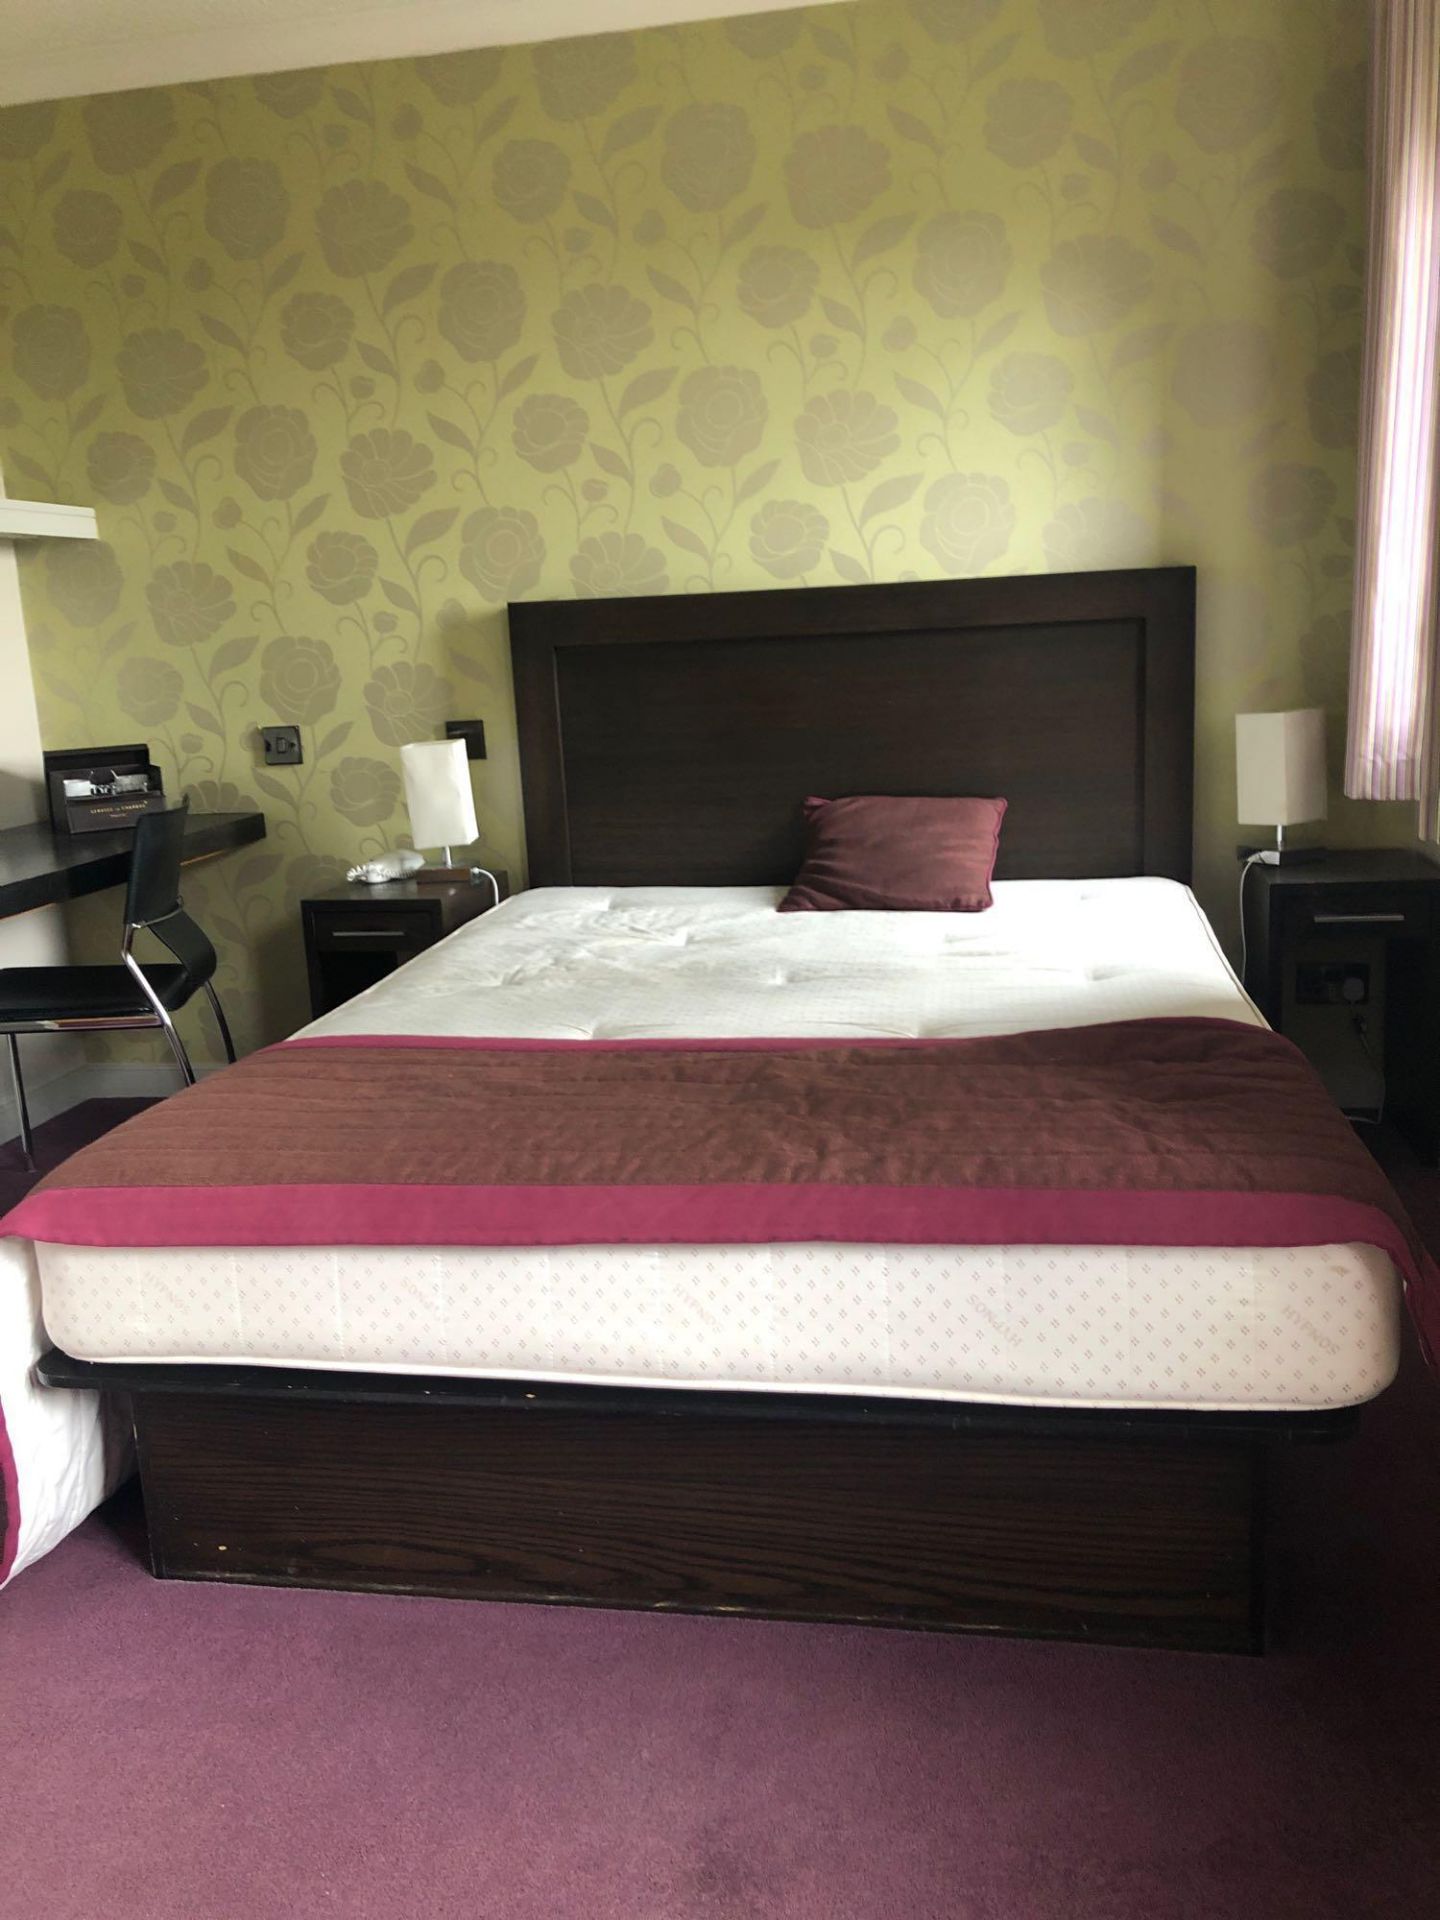 2 x King Size Beds & Double Beds With Headboards 8x Bedside Tables 6x Sets Of Drapes 4x Hanspree